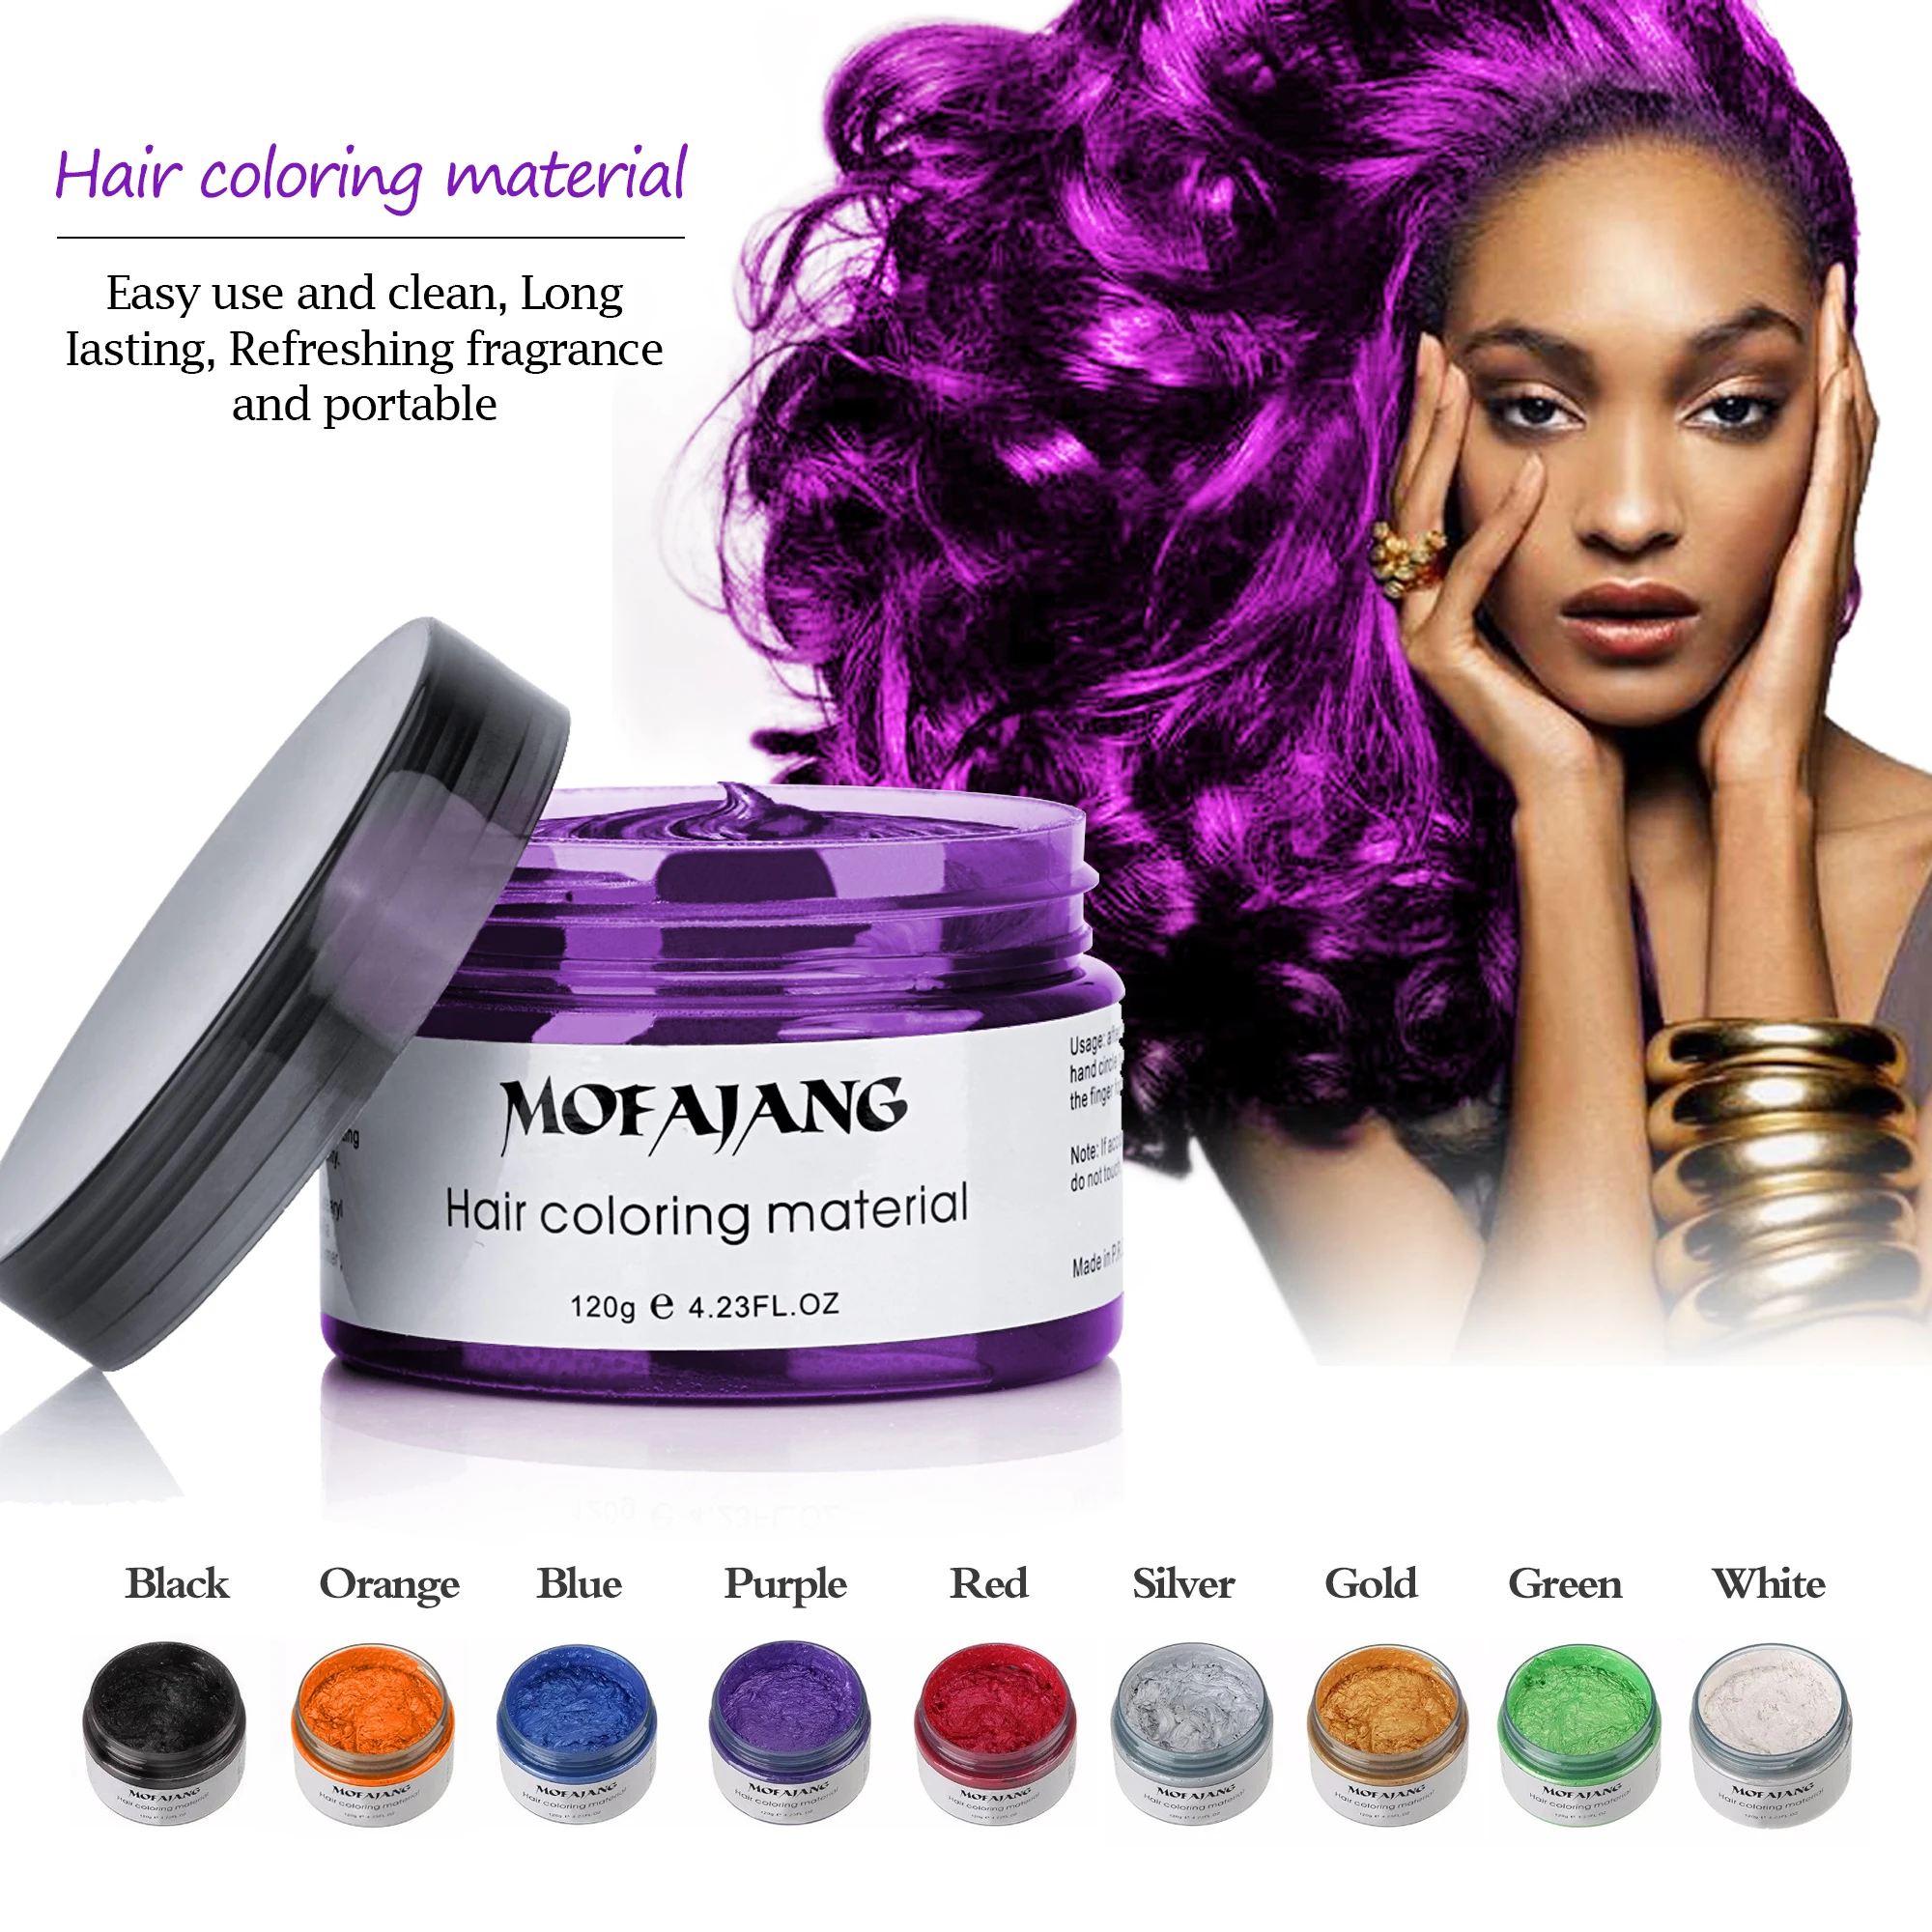 Mofajang 9 Colors Private Label Hair Styling Pomade Material Temporary  Disposable Mud Hair Color Wax - Buy Hair Color Wax,Private Label Hair Wax,Hair  Coloring Material Product on 